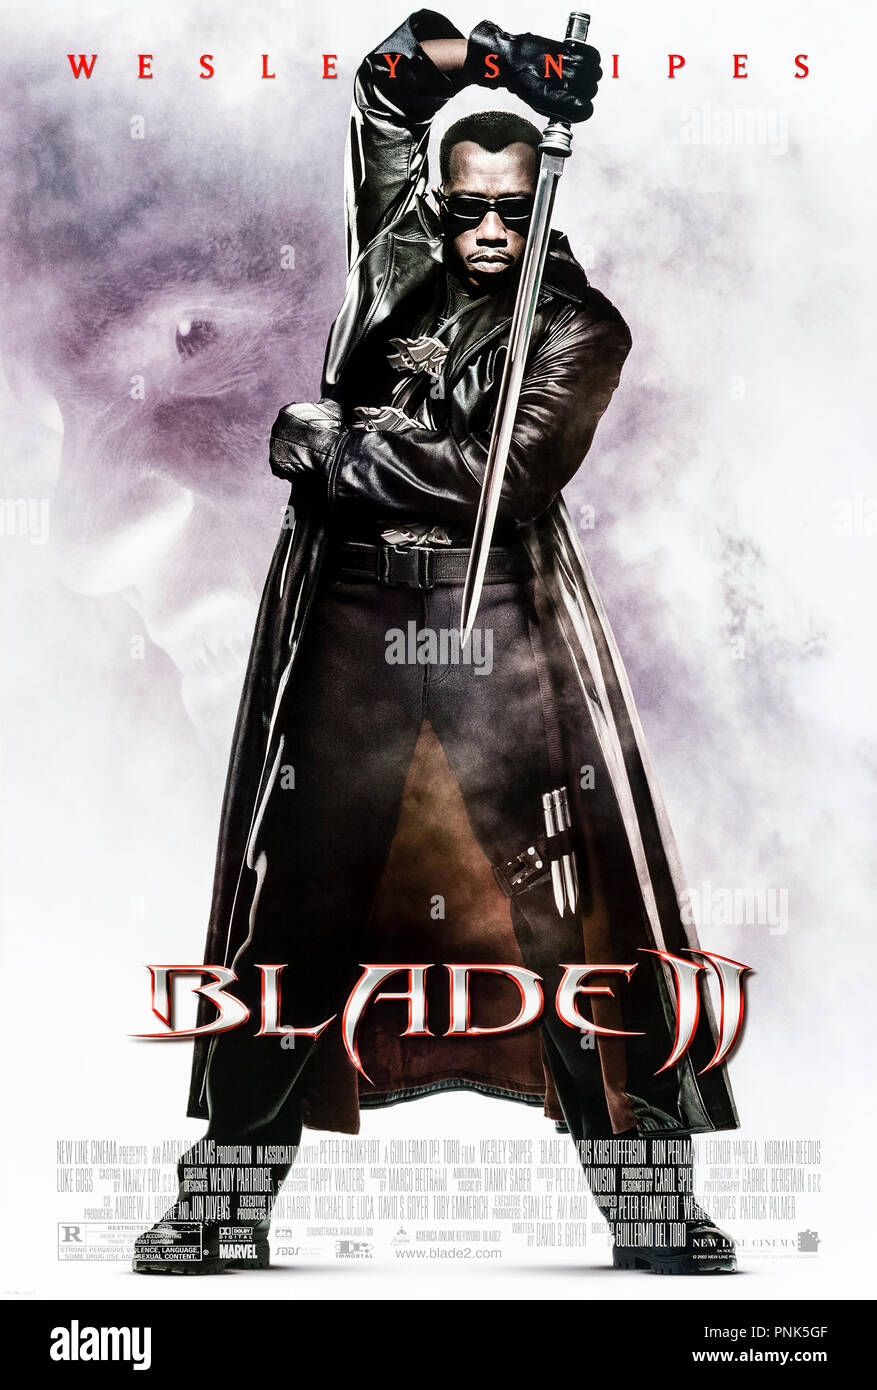 Blade II (2002) directed by Guillermo del Toro and starring Wesley Snipes, Kris Kristofferson, Ron Perlman and Leonor Varela. Blade assists the vampires elite Bloodpack in hunting down mutated vampires that feed on vampires as well as humans. Stock Photo